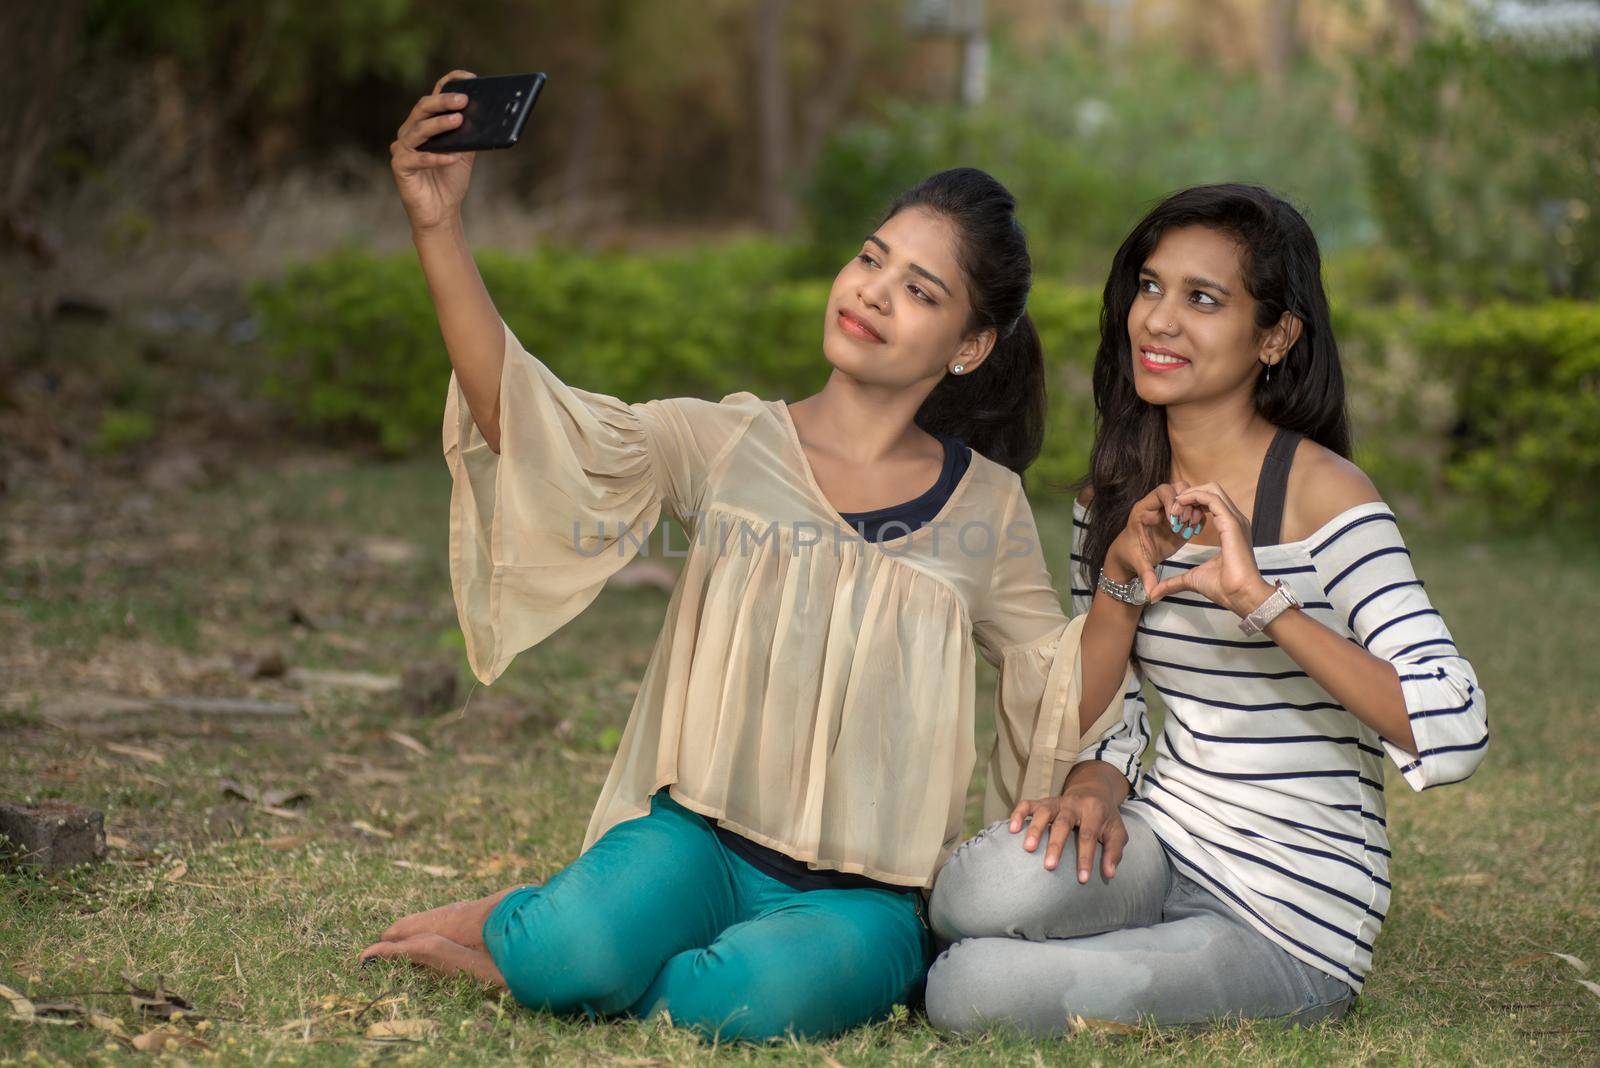 Two beautiful female friends taking selfie with smartphone in outdoors.